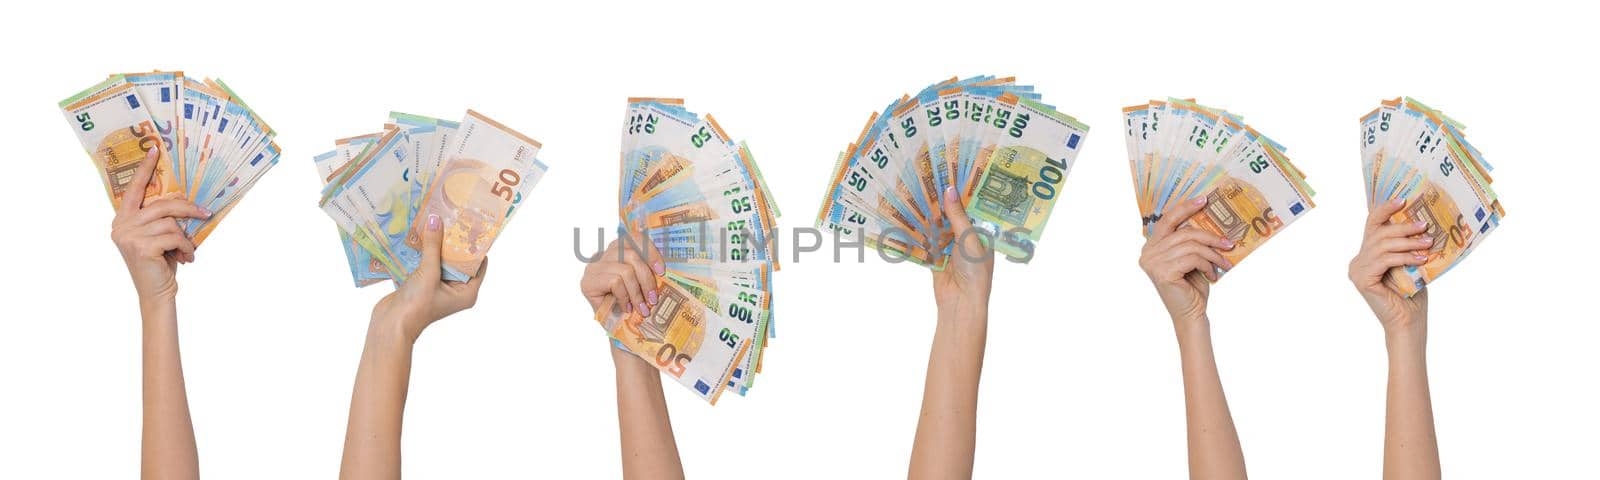 Hands holding euro cash money banknotes isolated on white background. High quality photo